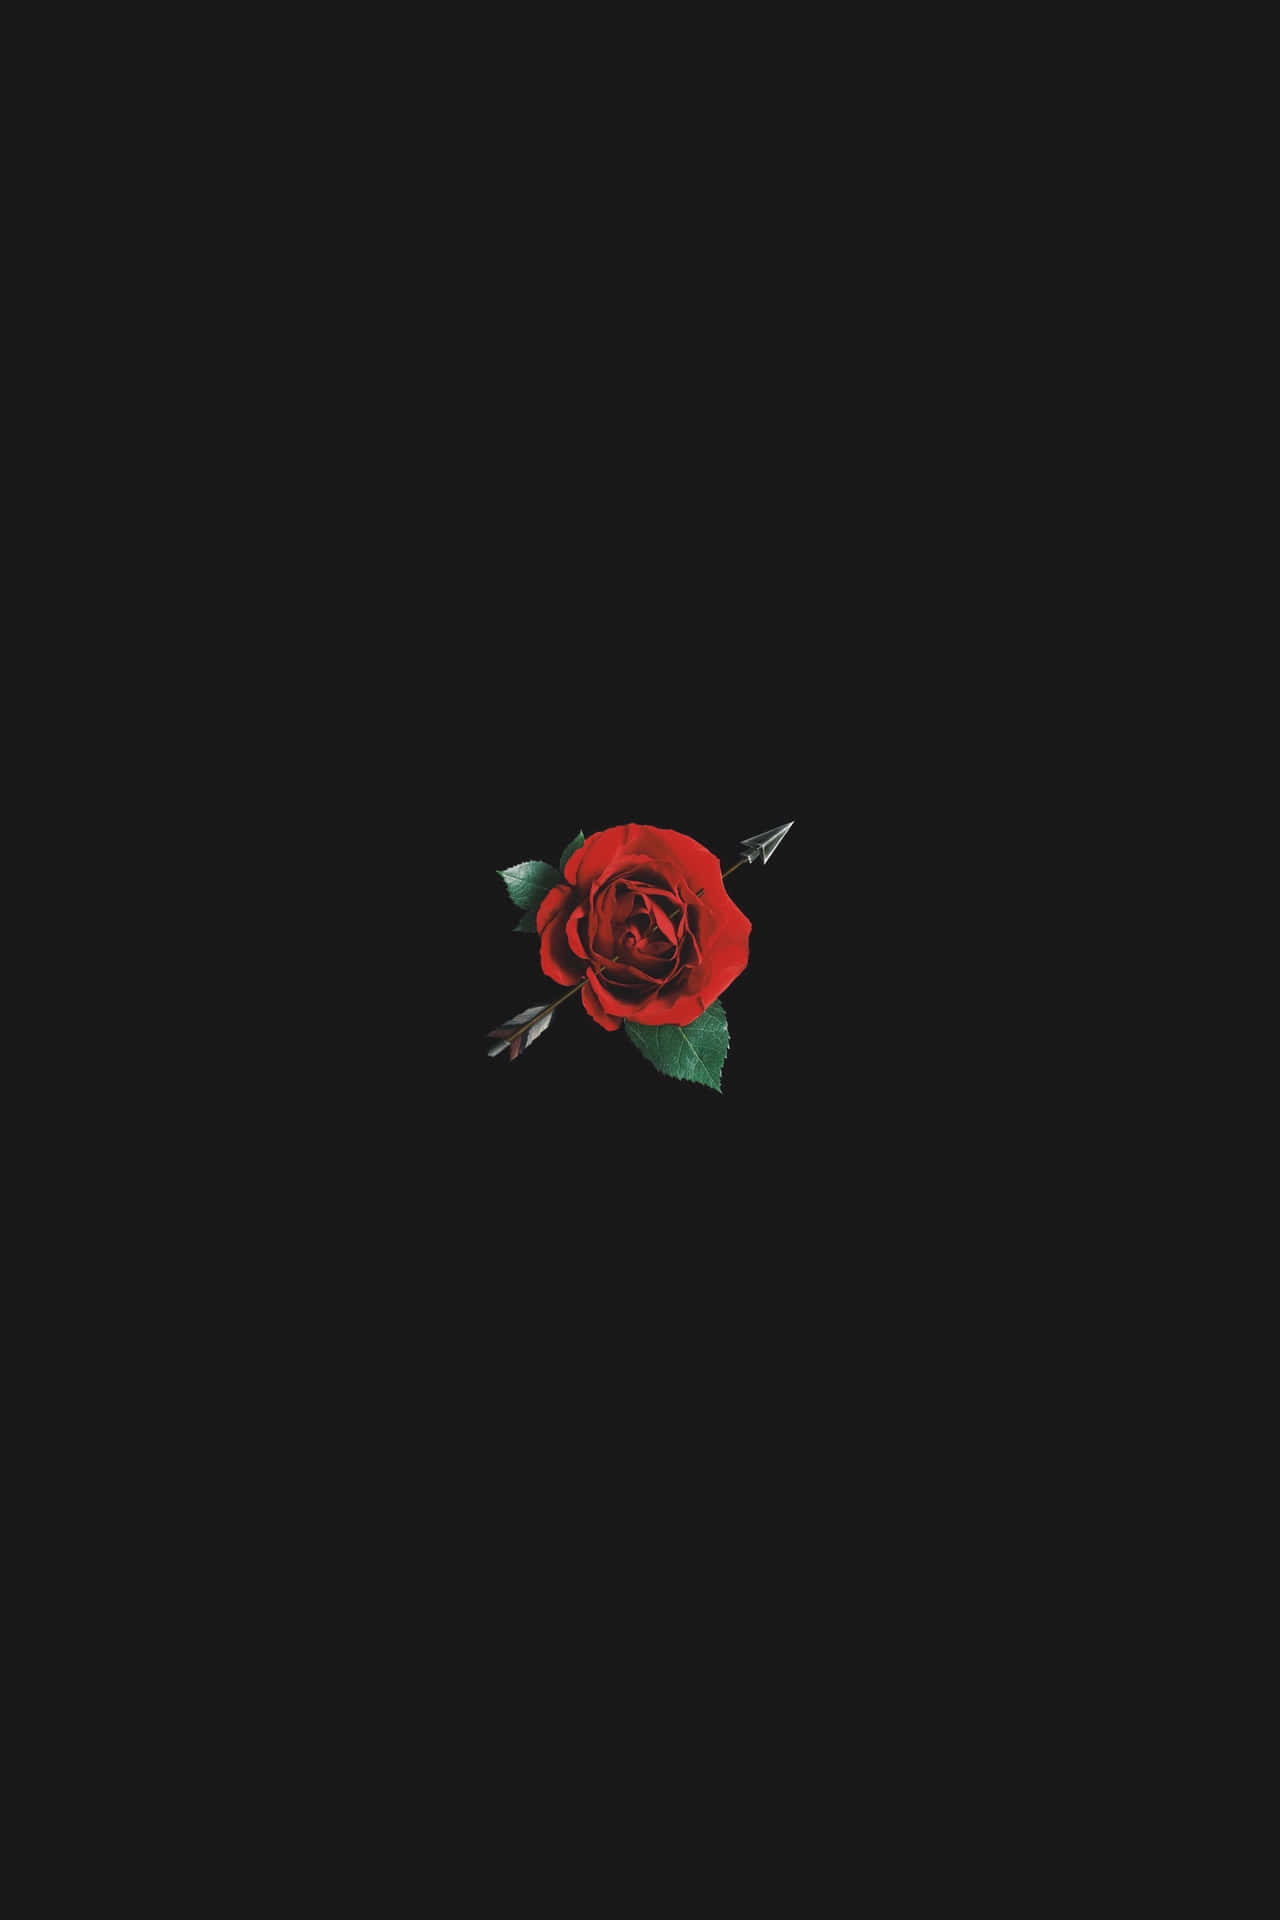 Minimalist Black And Red Aesthetic Small Rose Wallpaper